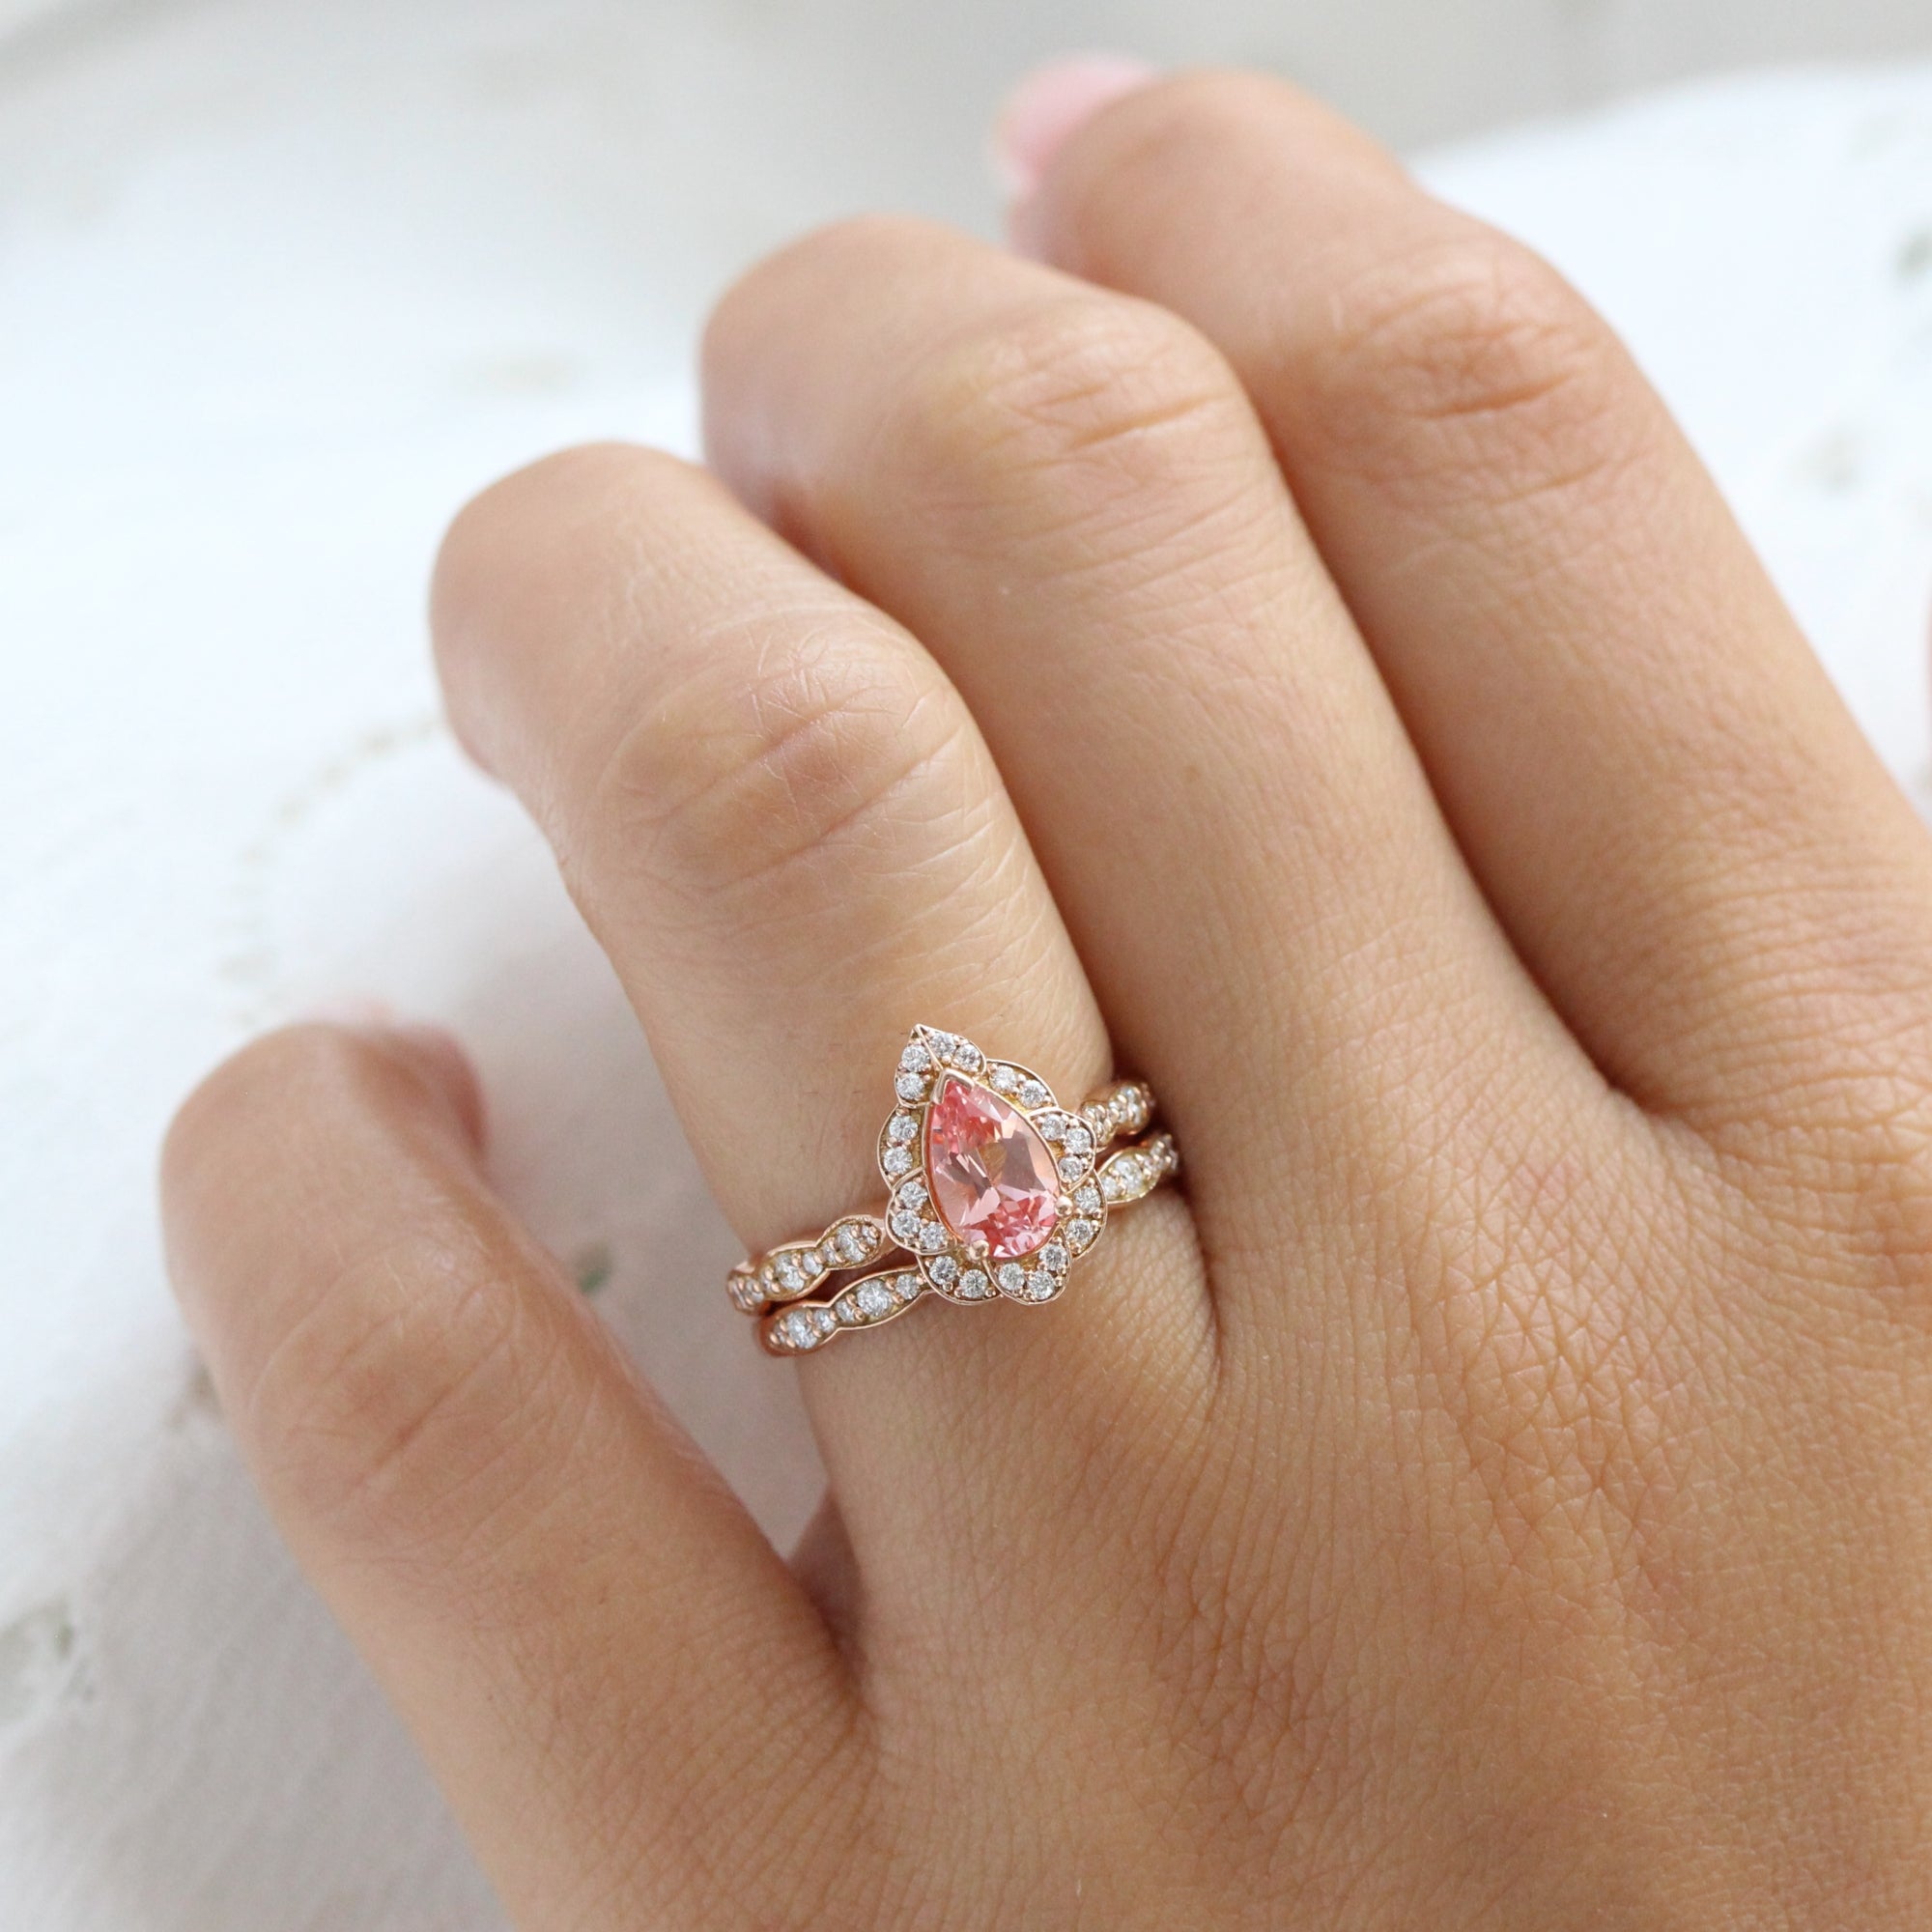 Pear peach sapphire engagement ring stack rose gold vintage halo diamond sapphire ring la more design jewelry